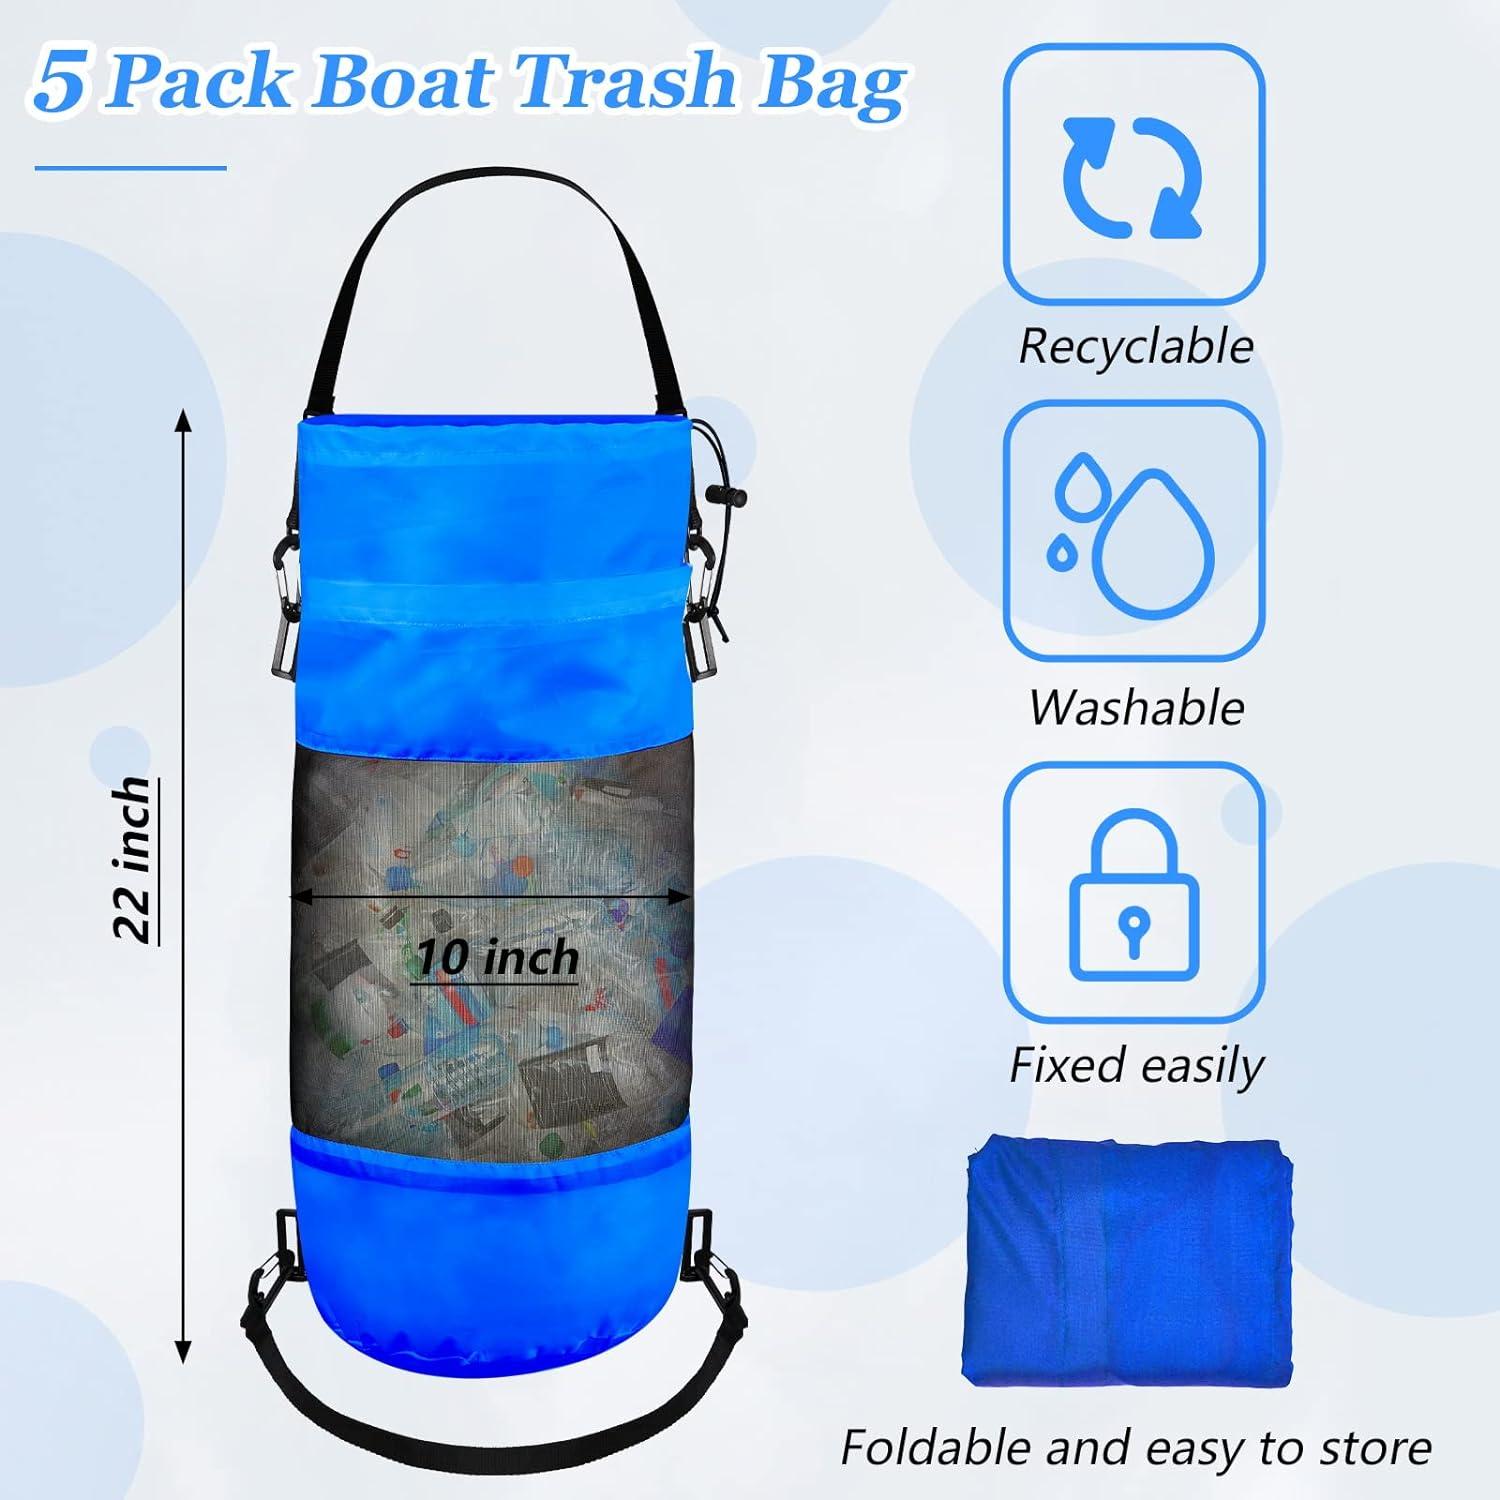 Reusable Trash Bag for Boat, Small Hoop, Mesh Trash Bag for Your Boat, 1Pc  - AliExpress